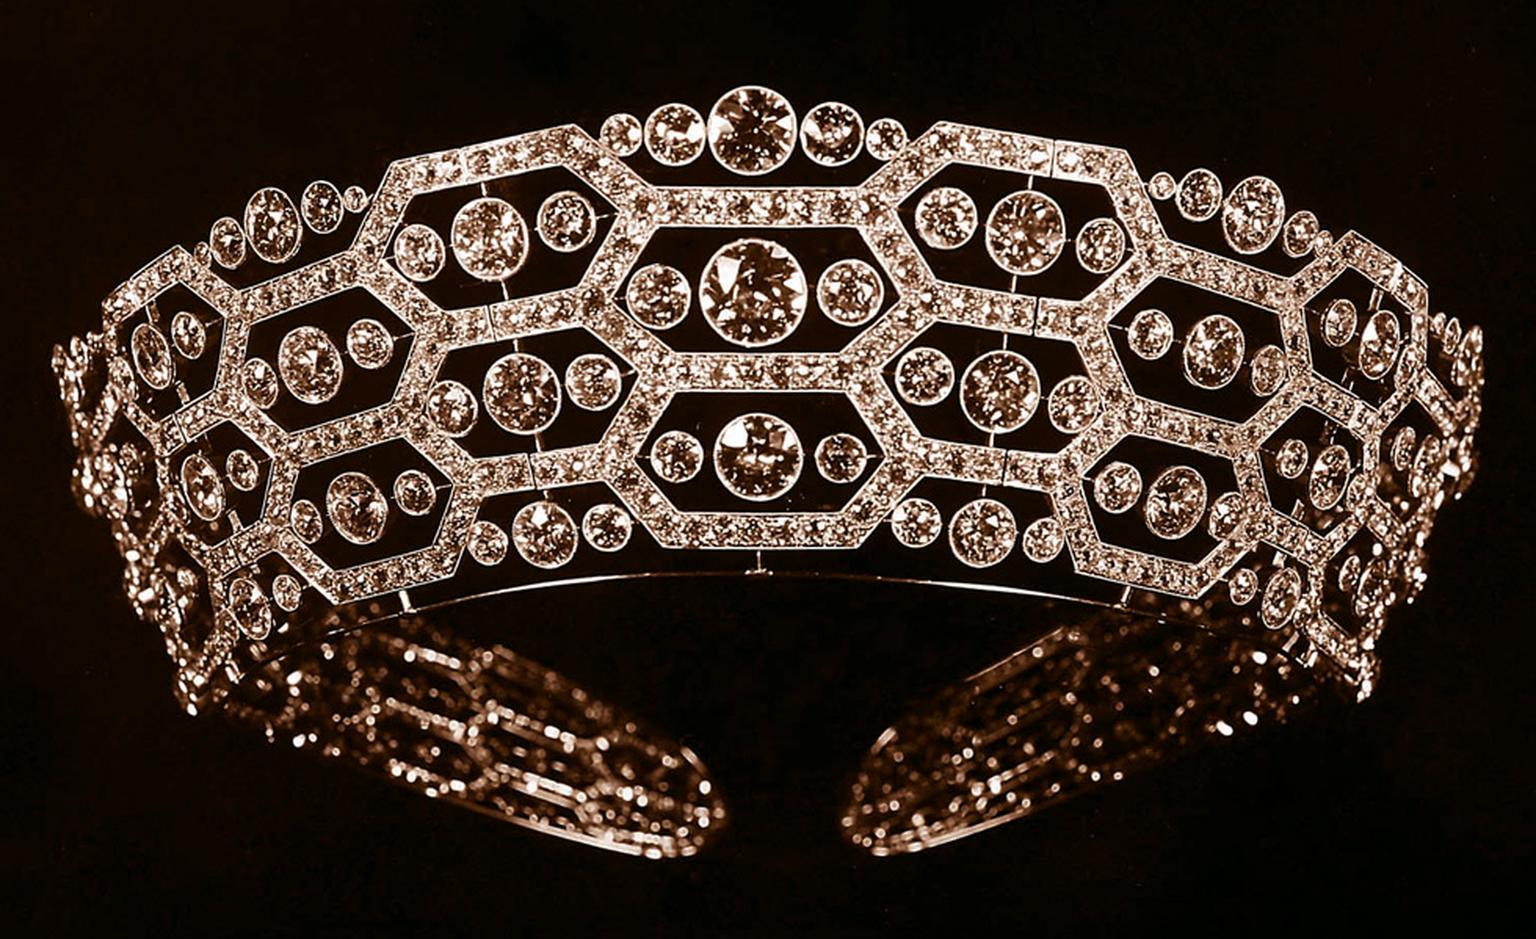 Boucheron second version of the Lady Greville Tiara redesigned in 1921 and later inherited to the Queen Mother in 1942. It was since modified and worn by Camilla, Duchess of Cornwall in 2006.